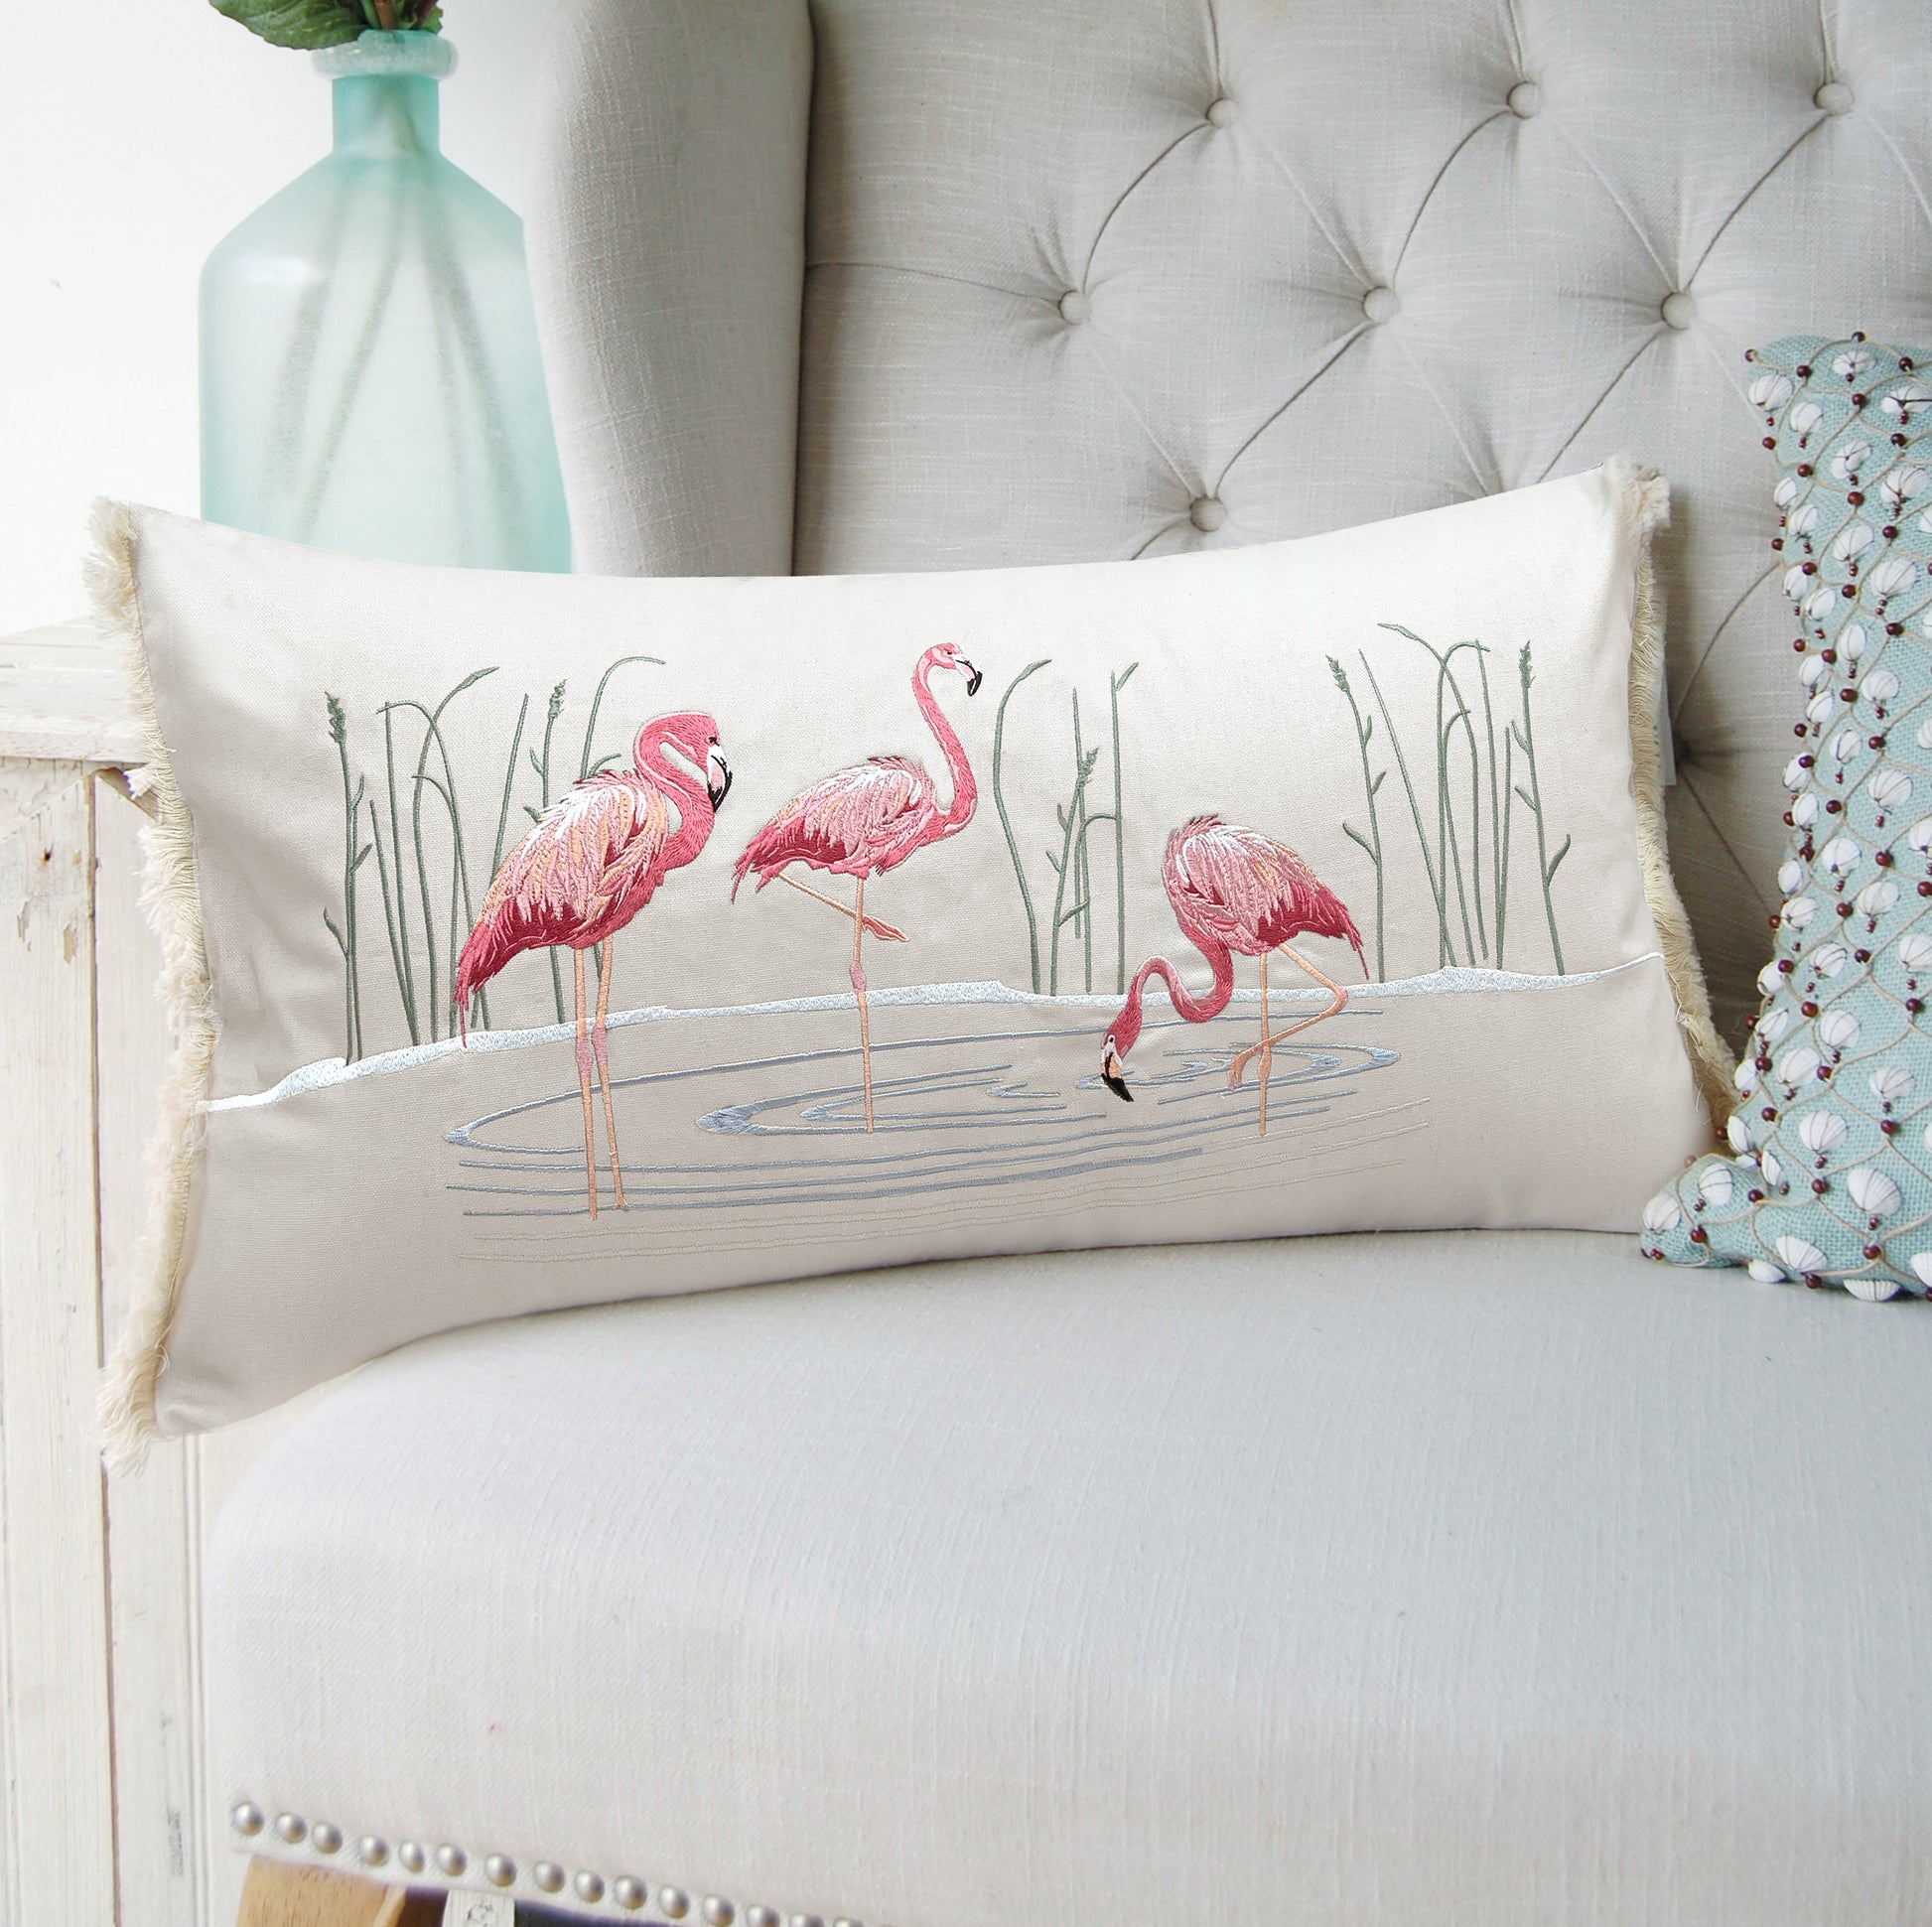 Flamboyant Flamingo pillow styled on a tufted couch.